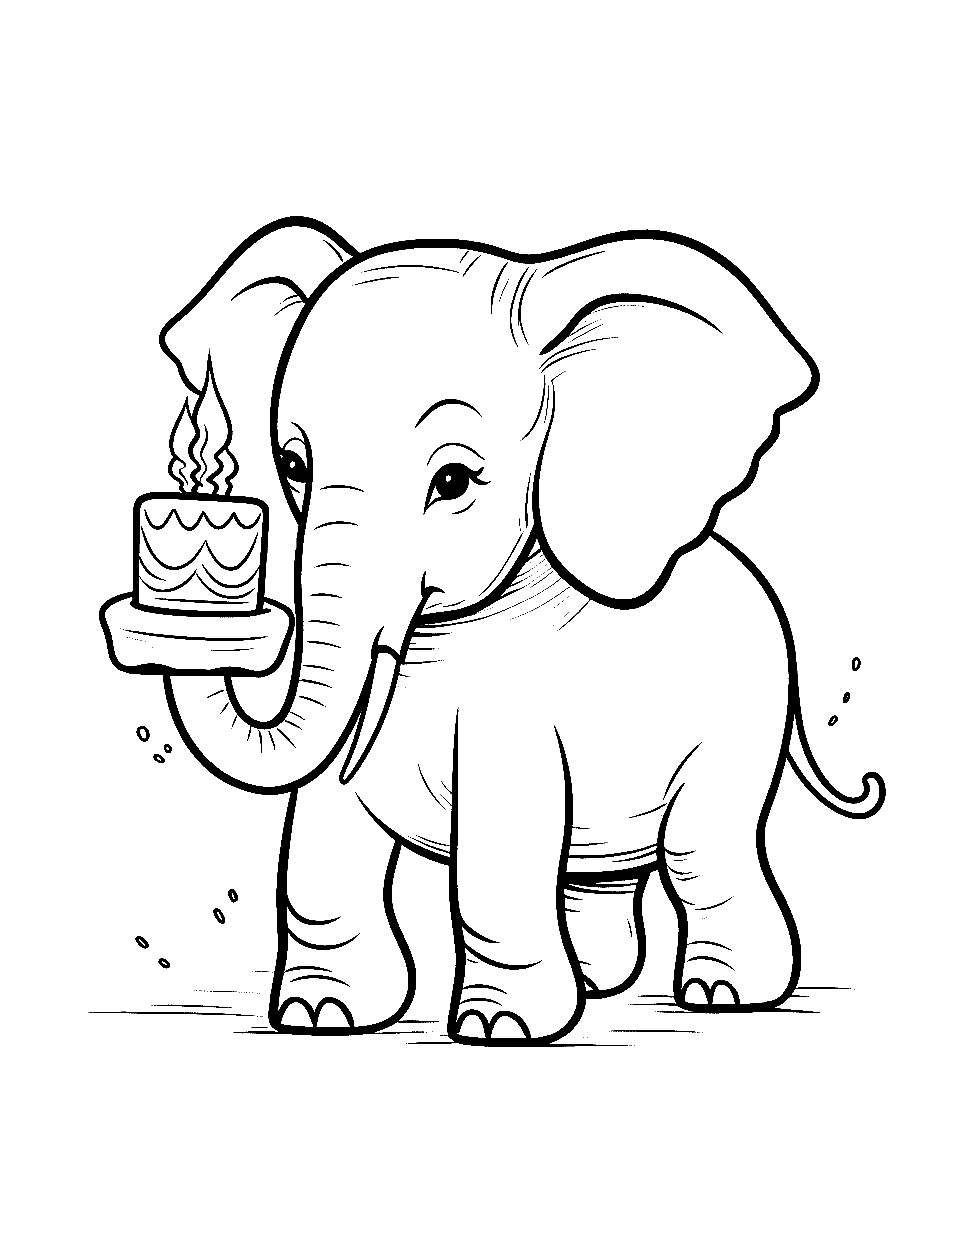 Birthday Celebration Elephant Coloring Page - An elephant with a small cake in front.